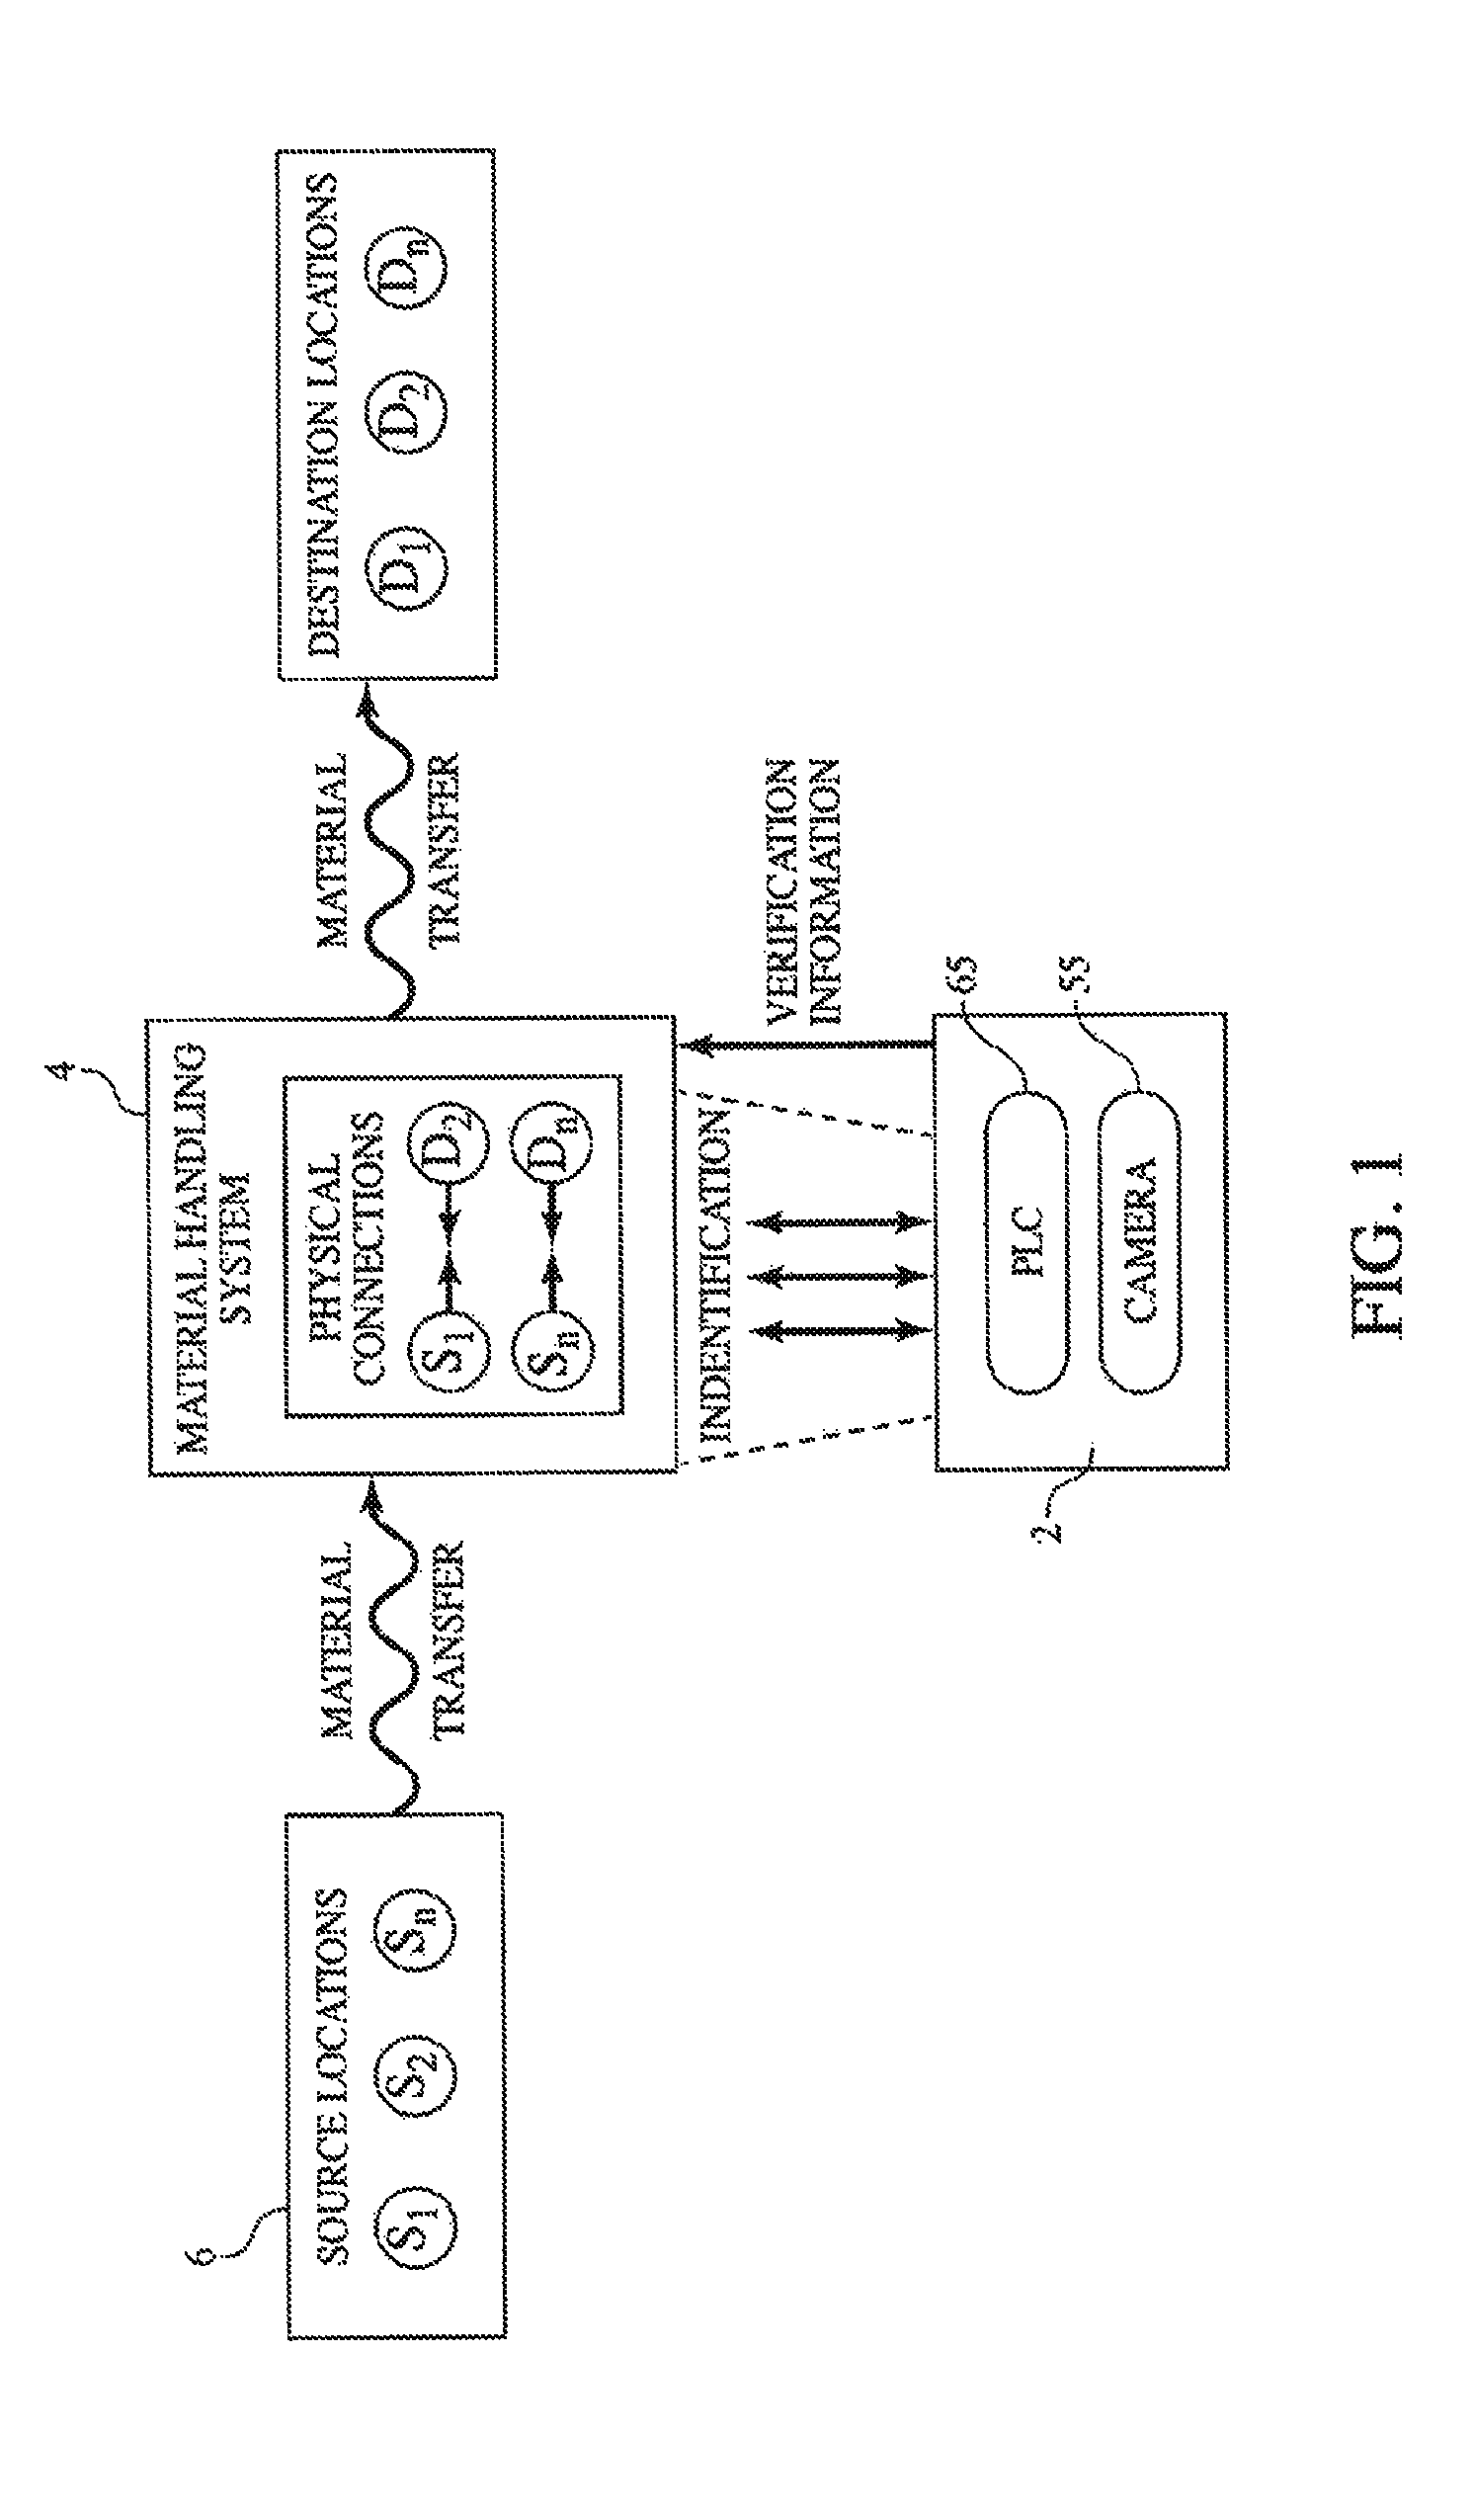 Method and process of verifying physical connections within a material handling system